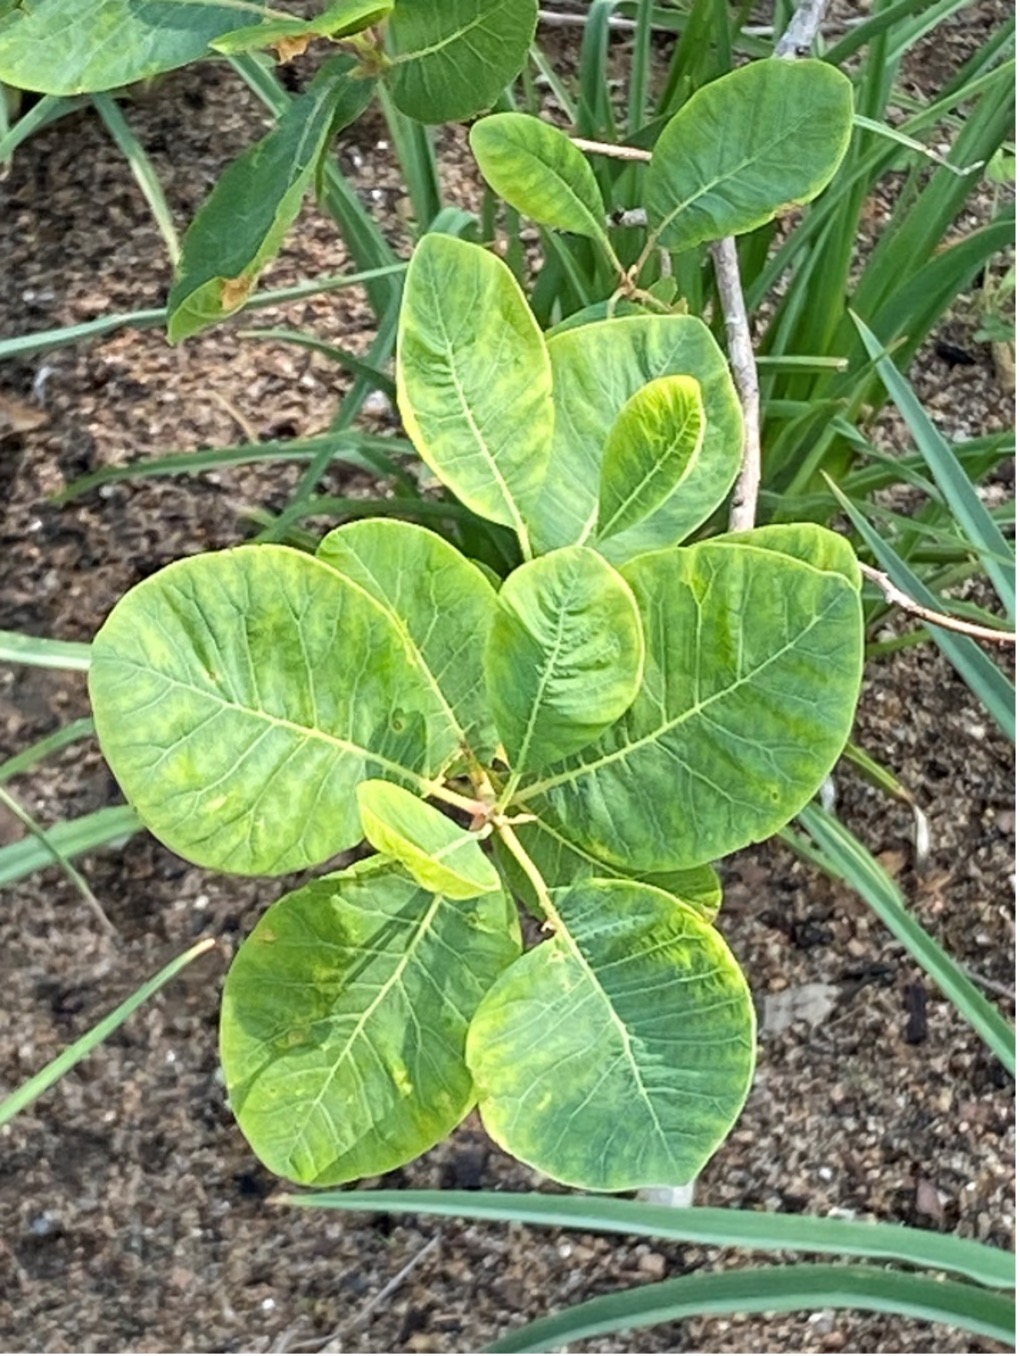 The green foliage of an American smoketree growing in St. Louis, Missouri. Photo courtesy of Michele Warmund.